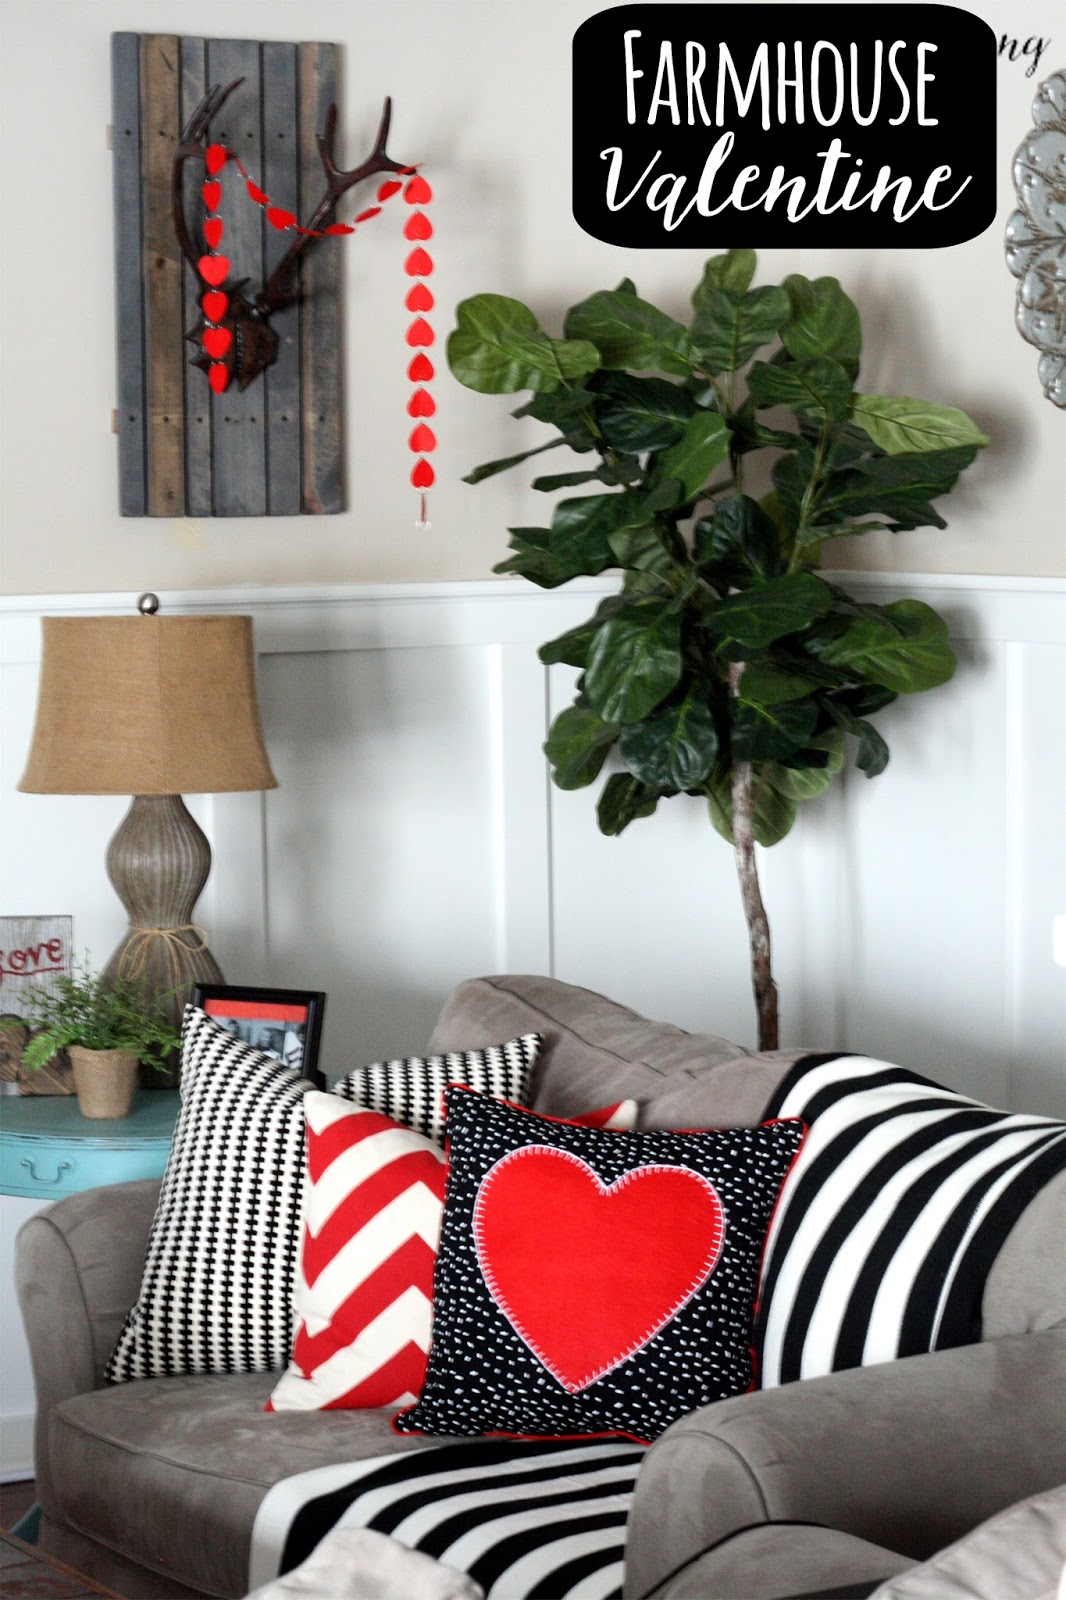 Chic on a Shoestring Decorating Farmhouse Valentine's Day Decor